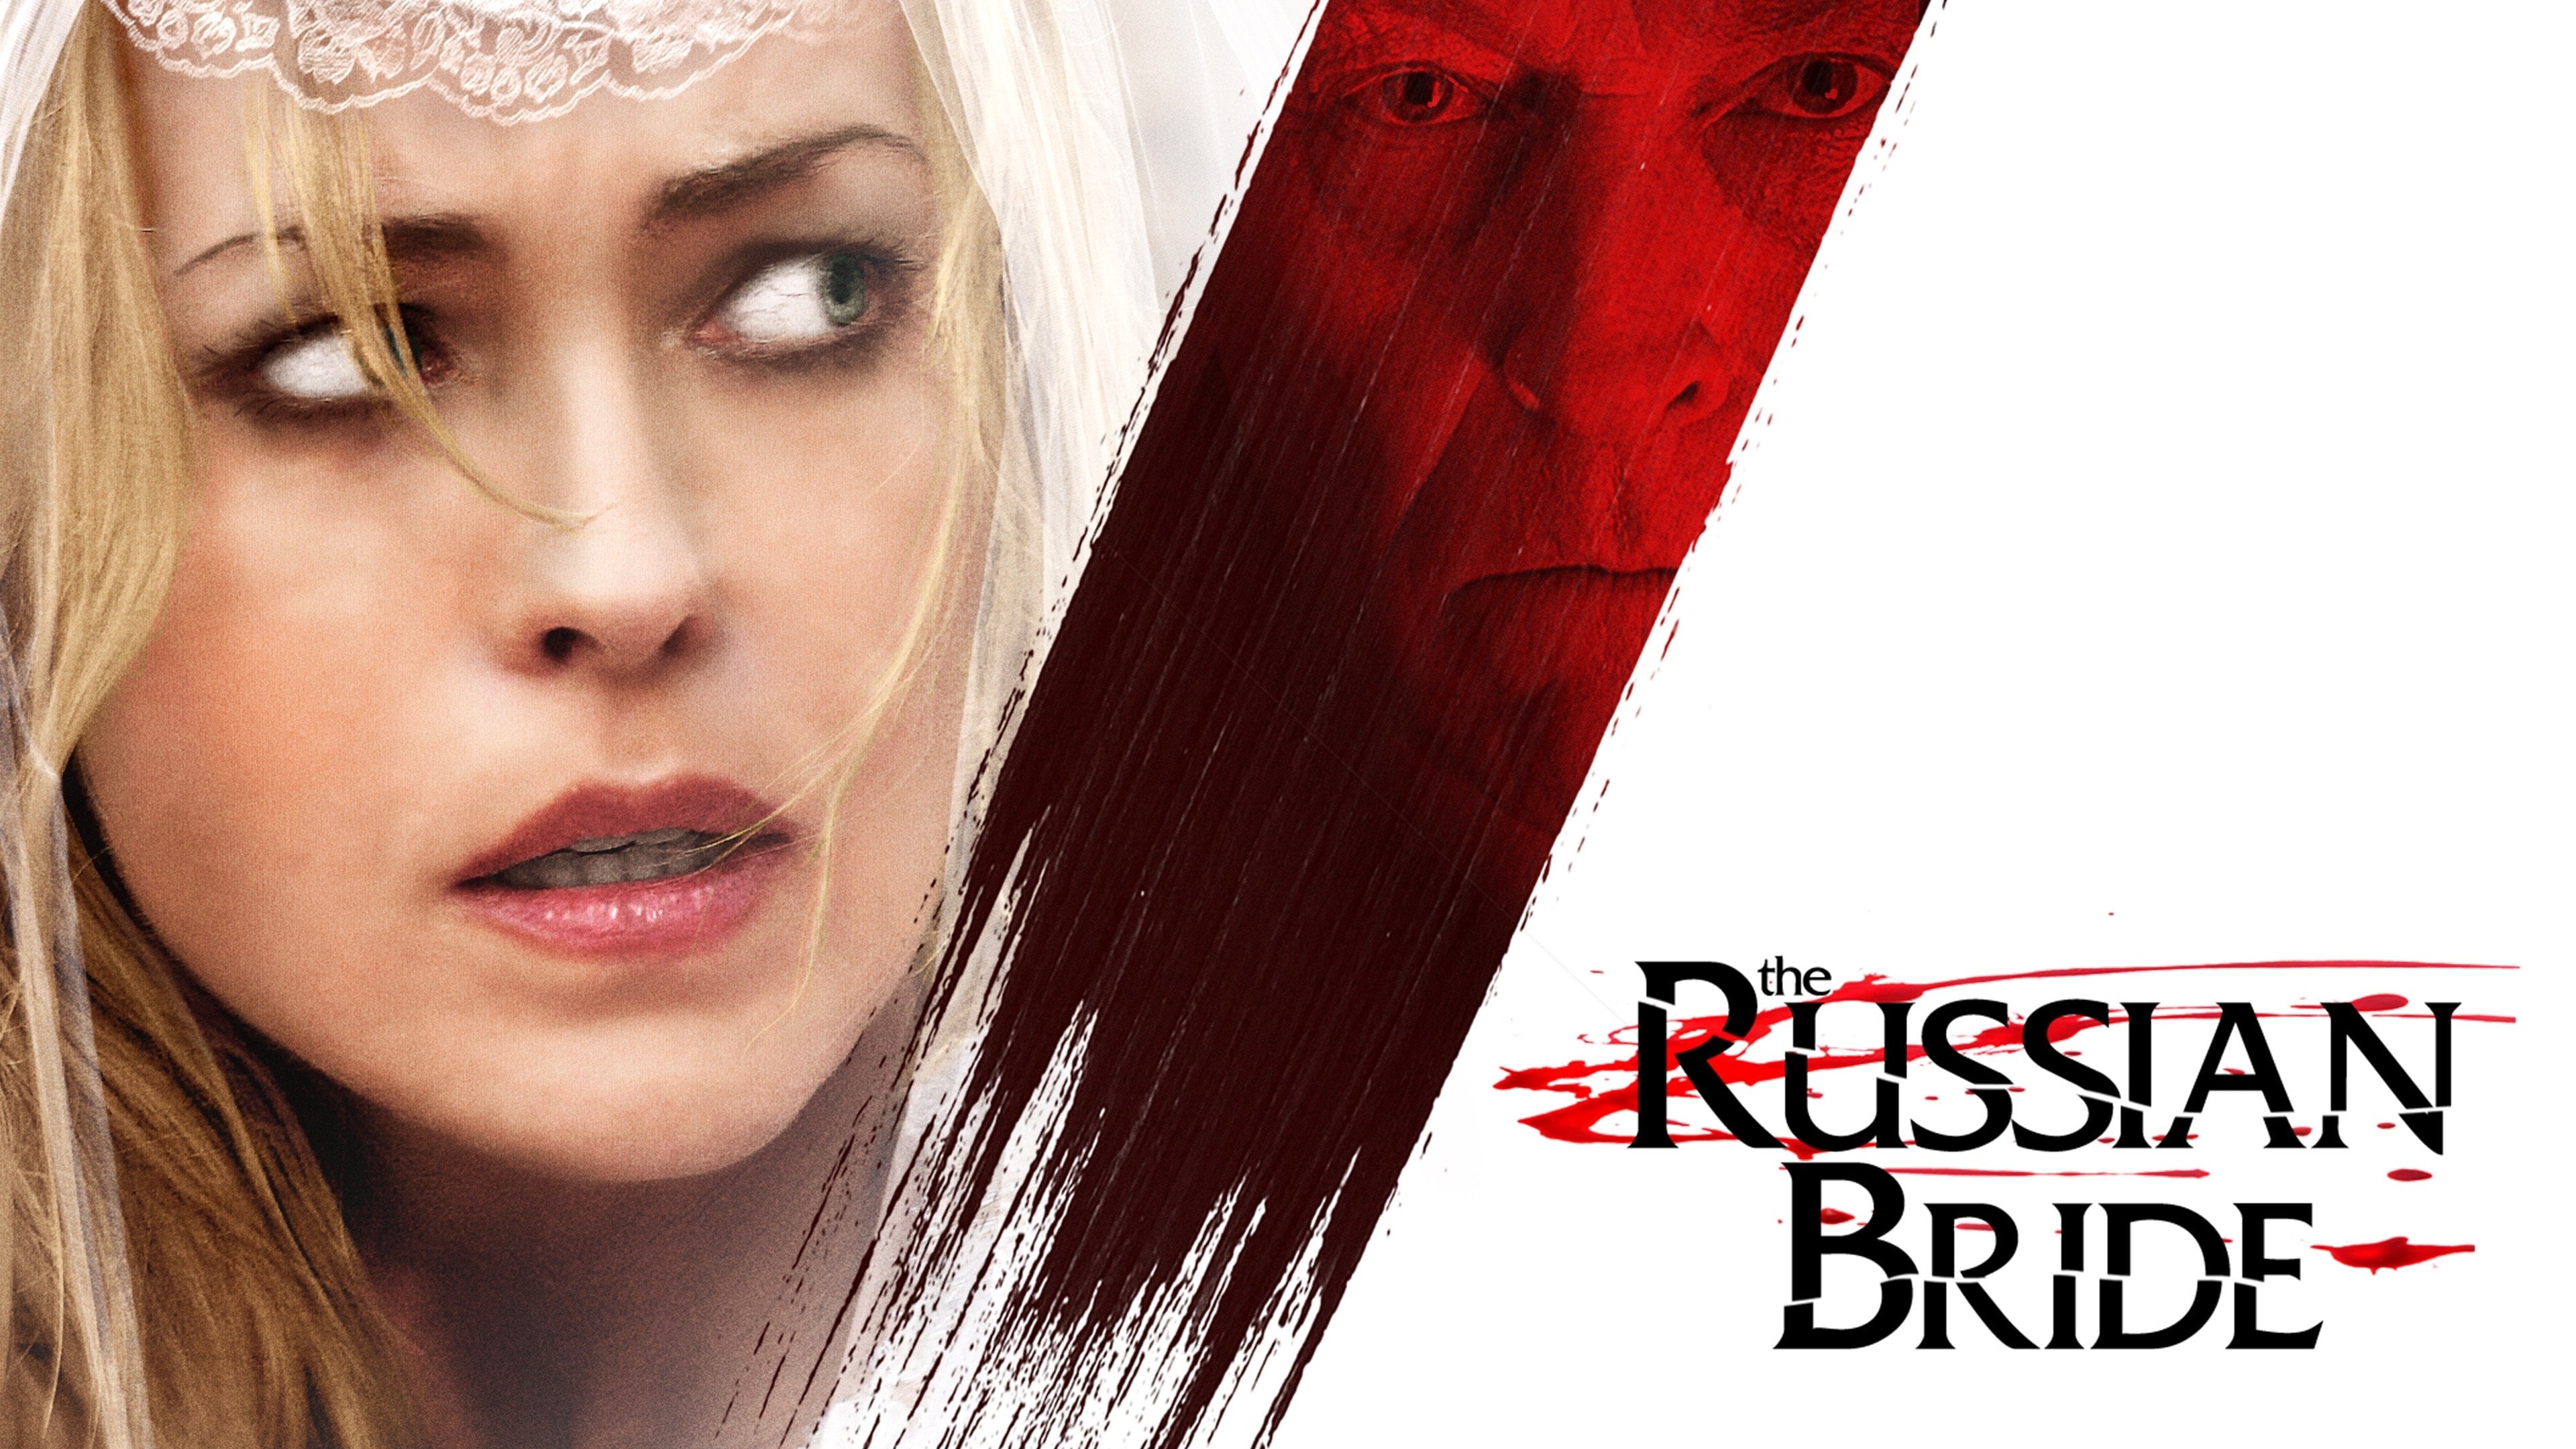 Movie The Russian Bride HD Wallpaper | Background Image